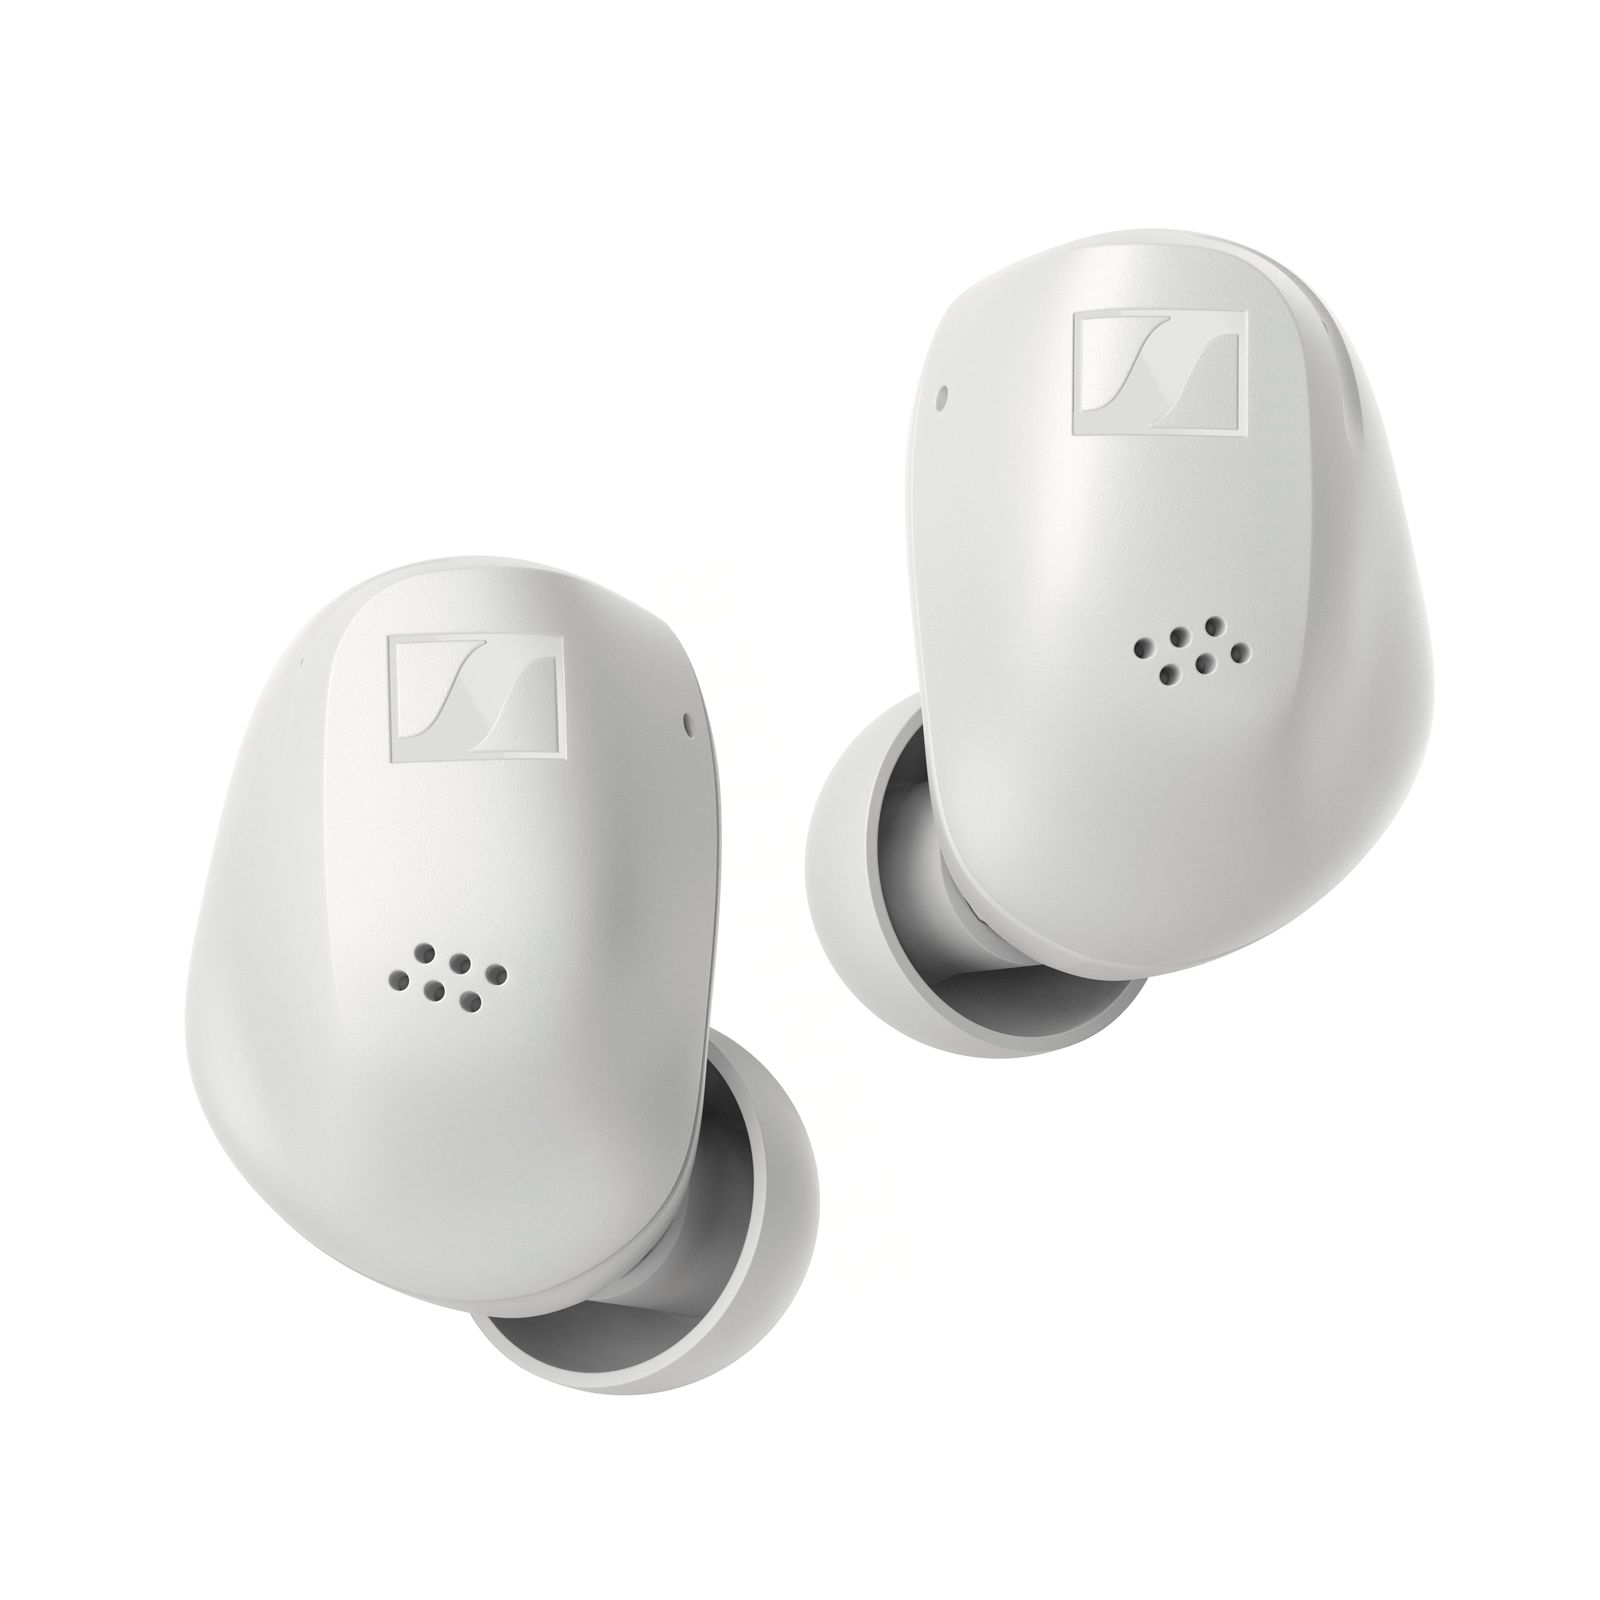 The earbuds are also IP54 rated for splash resistance